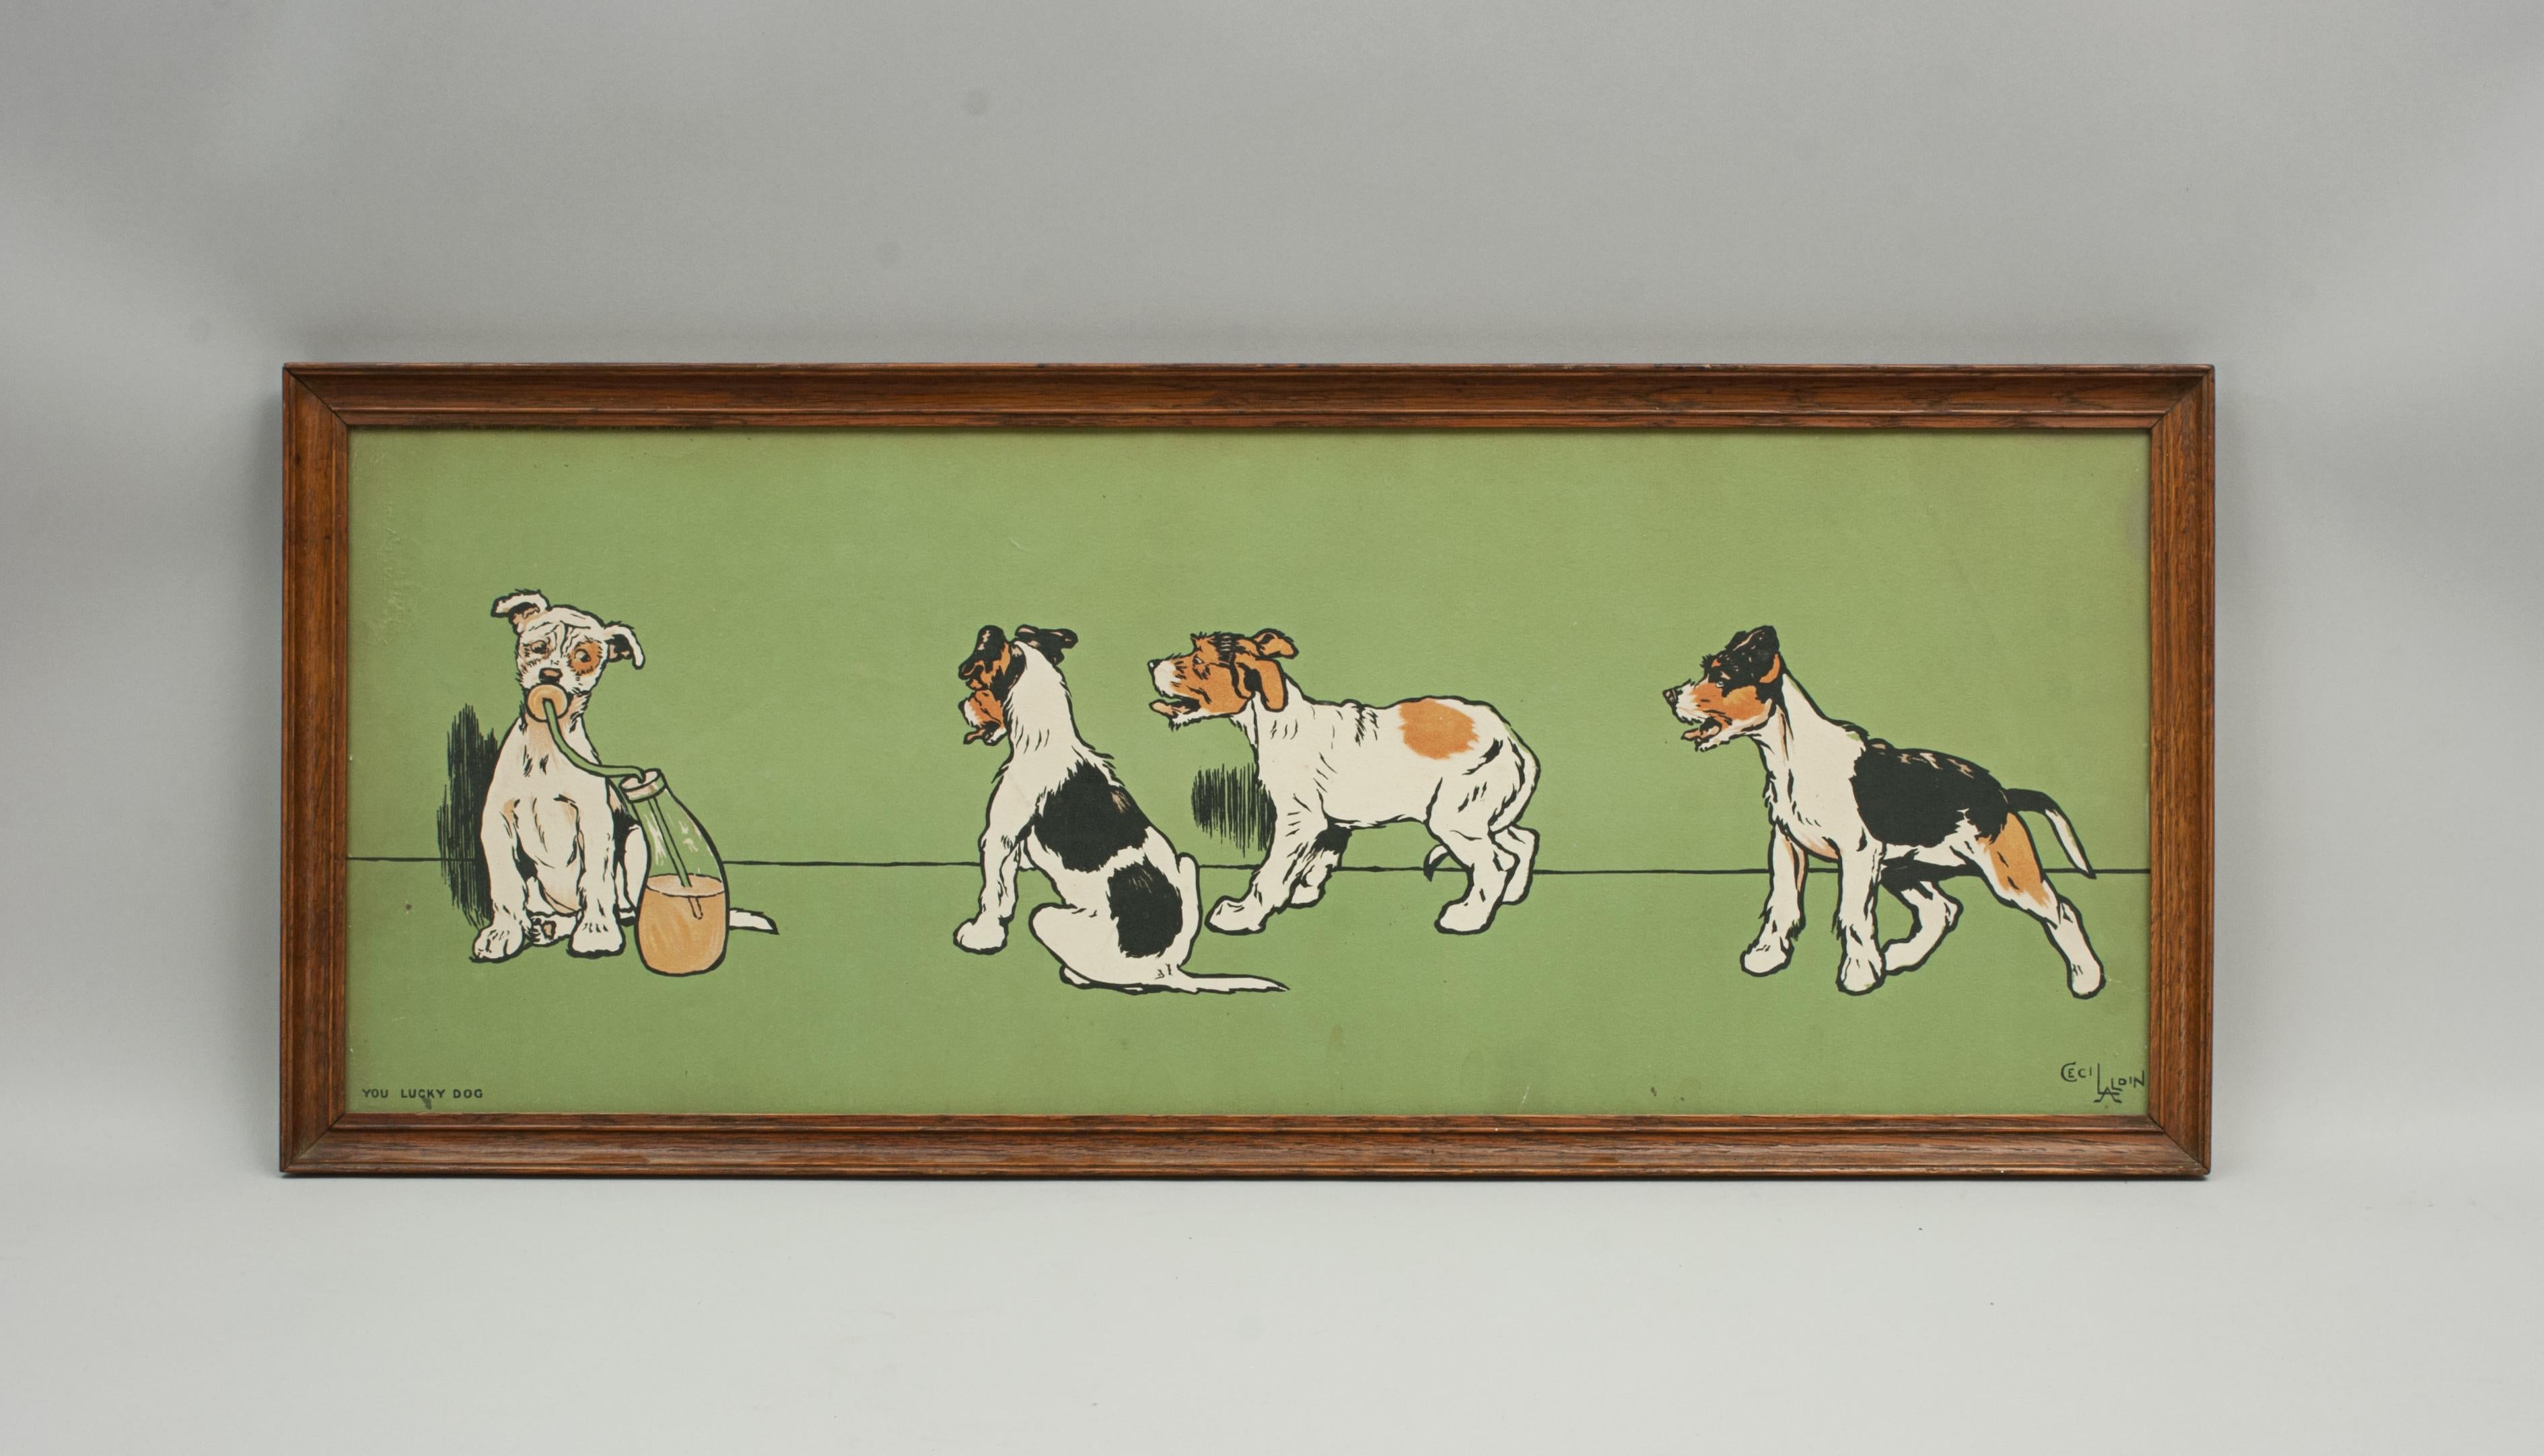 Cecil Aldin, The Lucky Dog.
A good single chromolithograph from a set of 12 Nursery friezes developed from designs which Aldin had painted on the walls of his children's nursery. This is called 'The Lucky Dog' and shows a dog drinking milk through